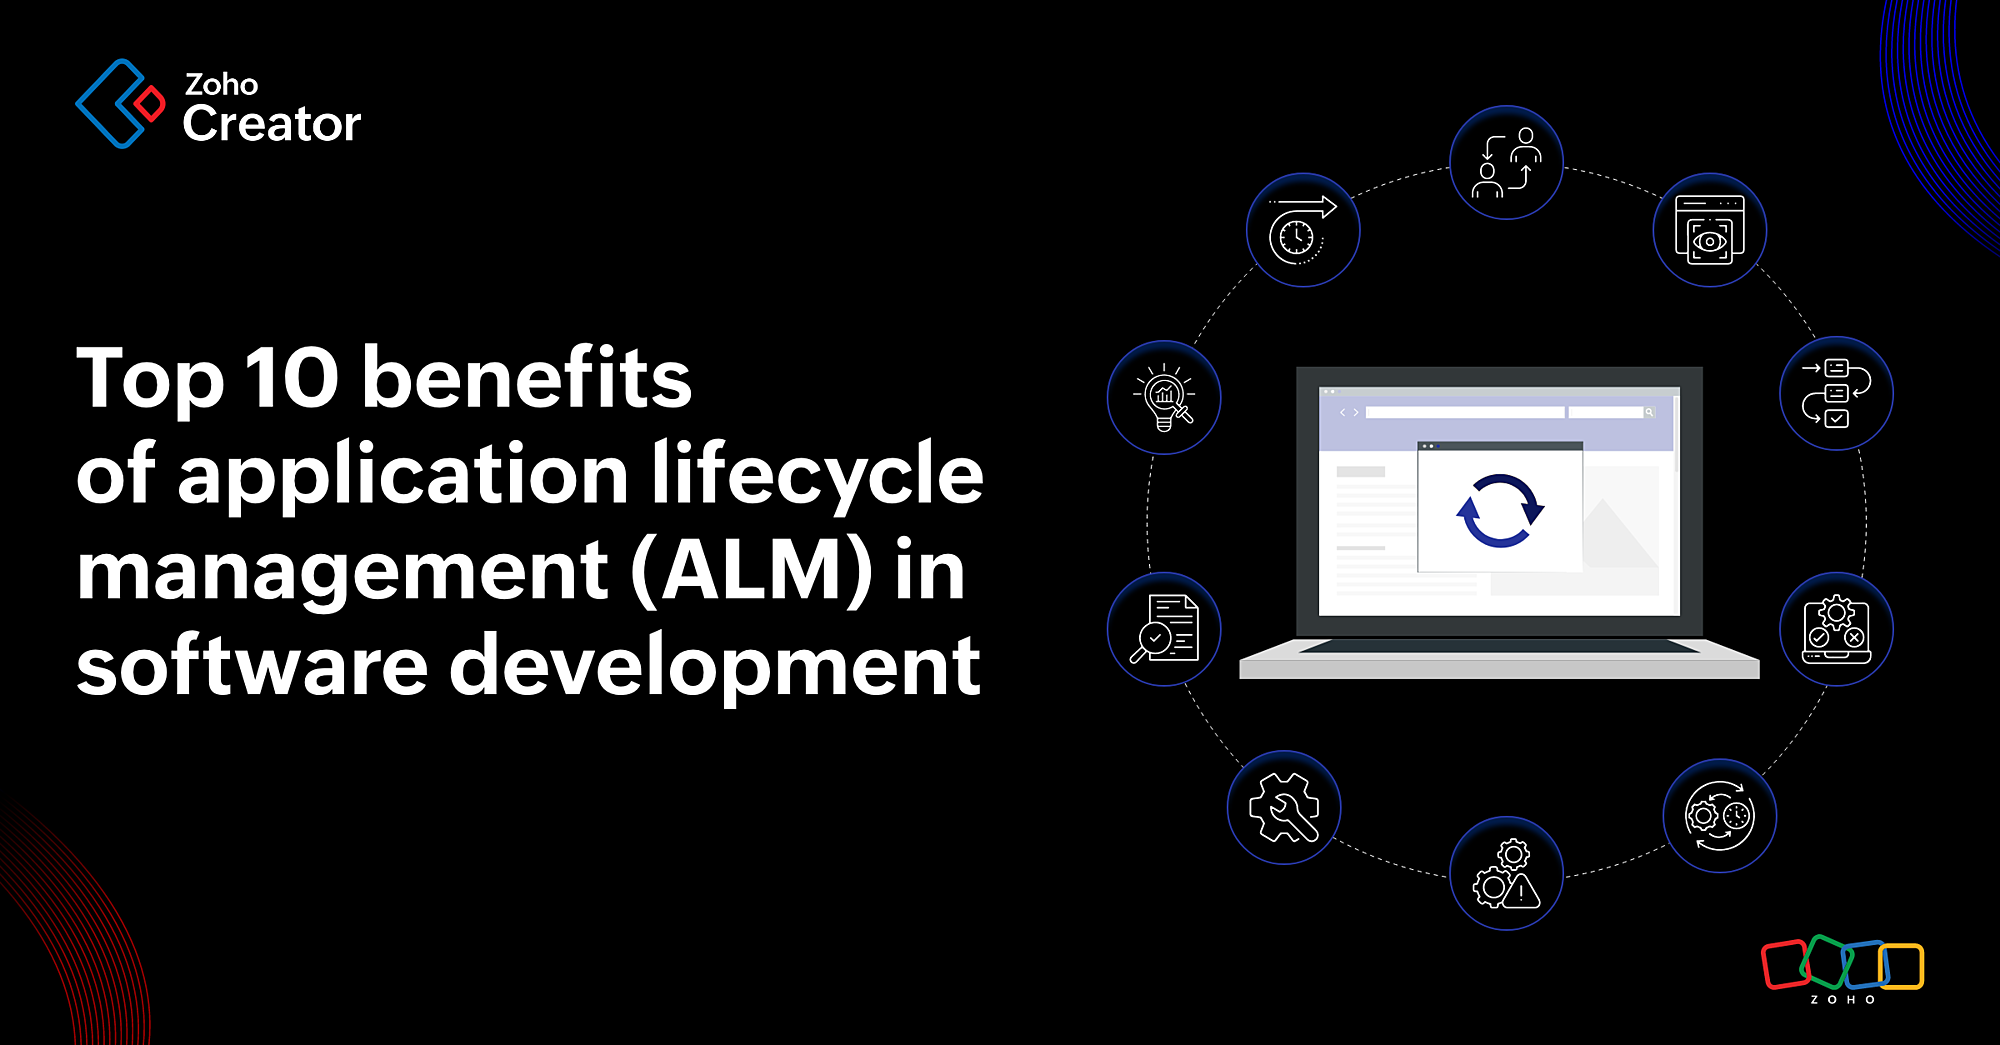 top 10 benefits of application lifecycle management (ALM)